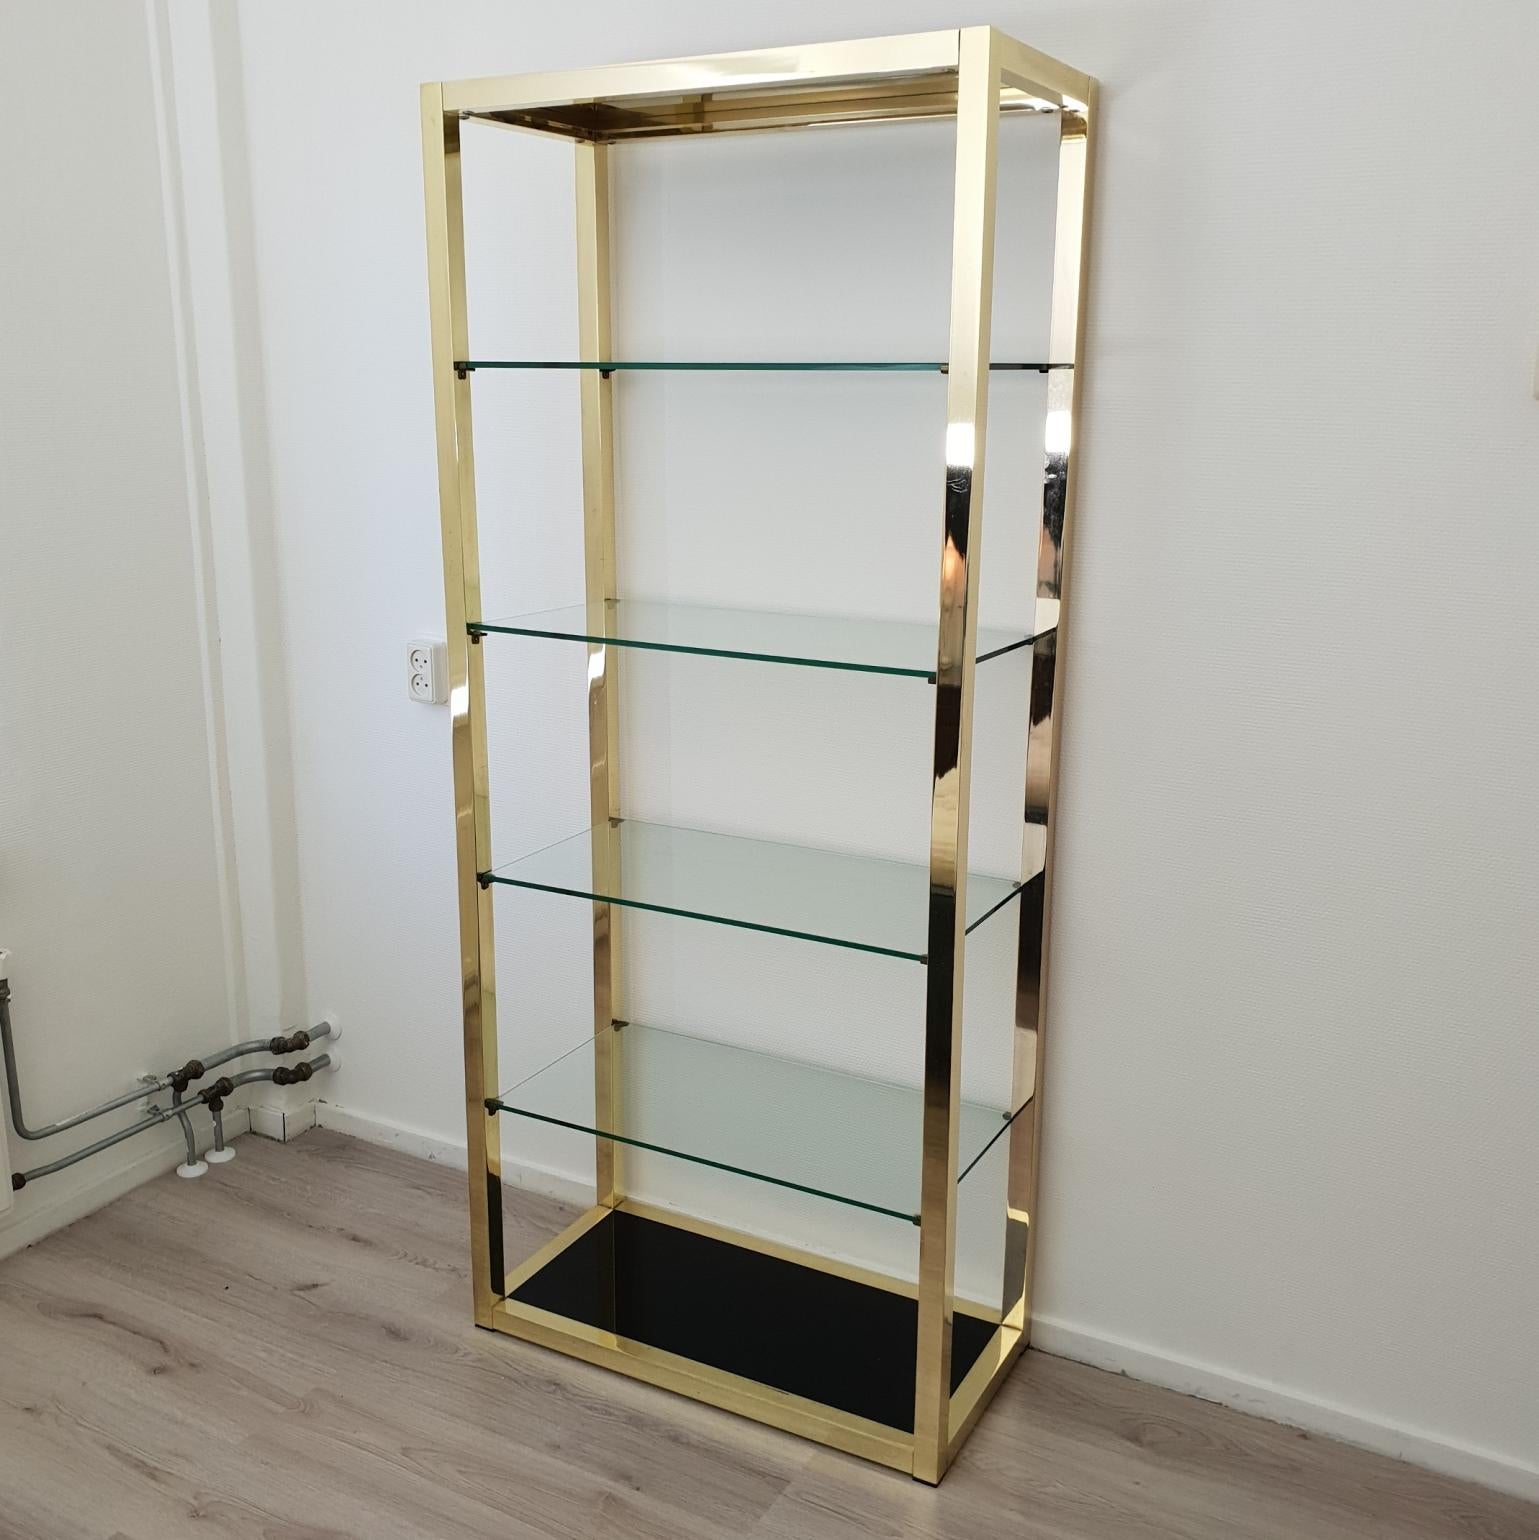 Italian Mid-Century Modern Gold Plated Shelving Unit Étagère, 1970s For Sale 5